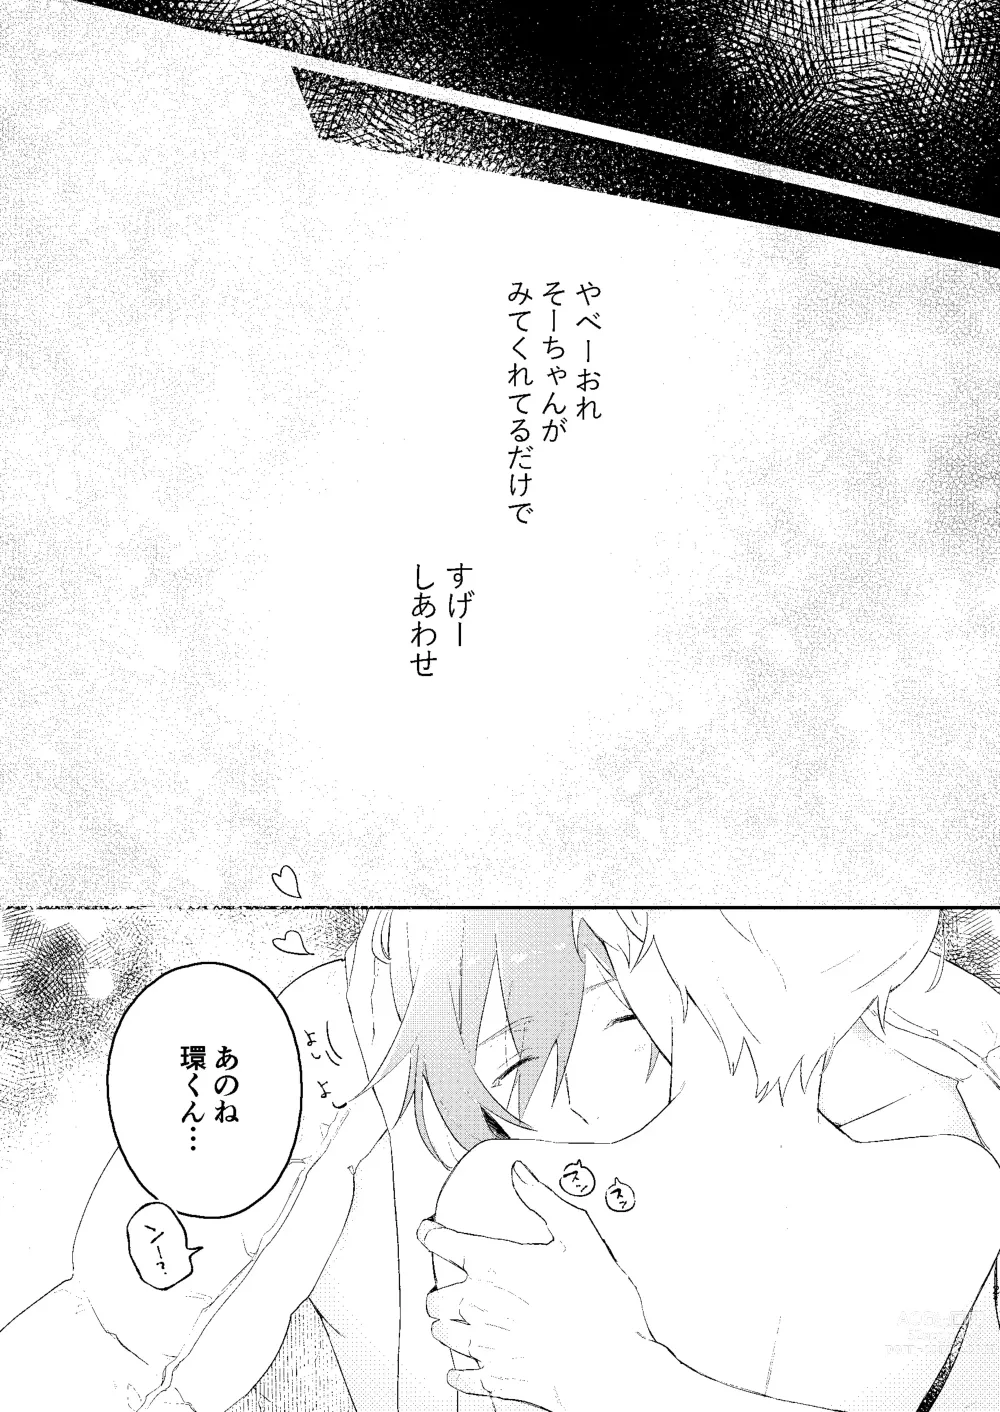 Page 20 of doujinshi Love you in a Dream